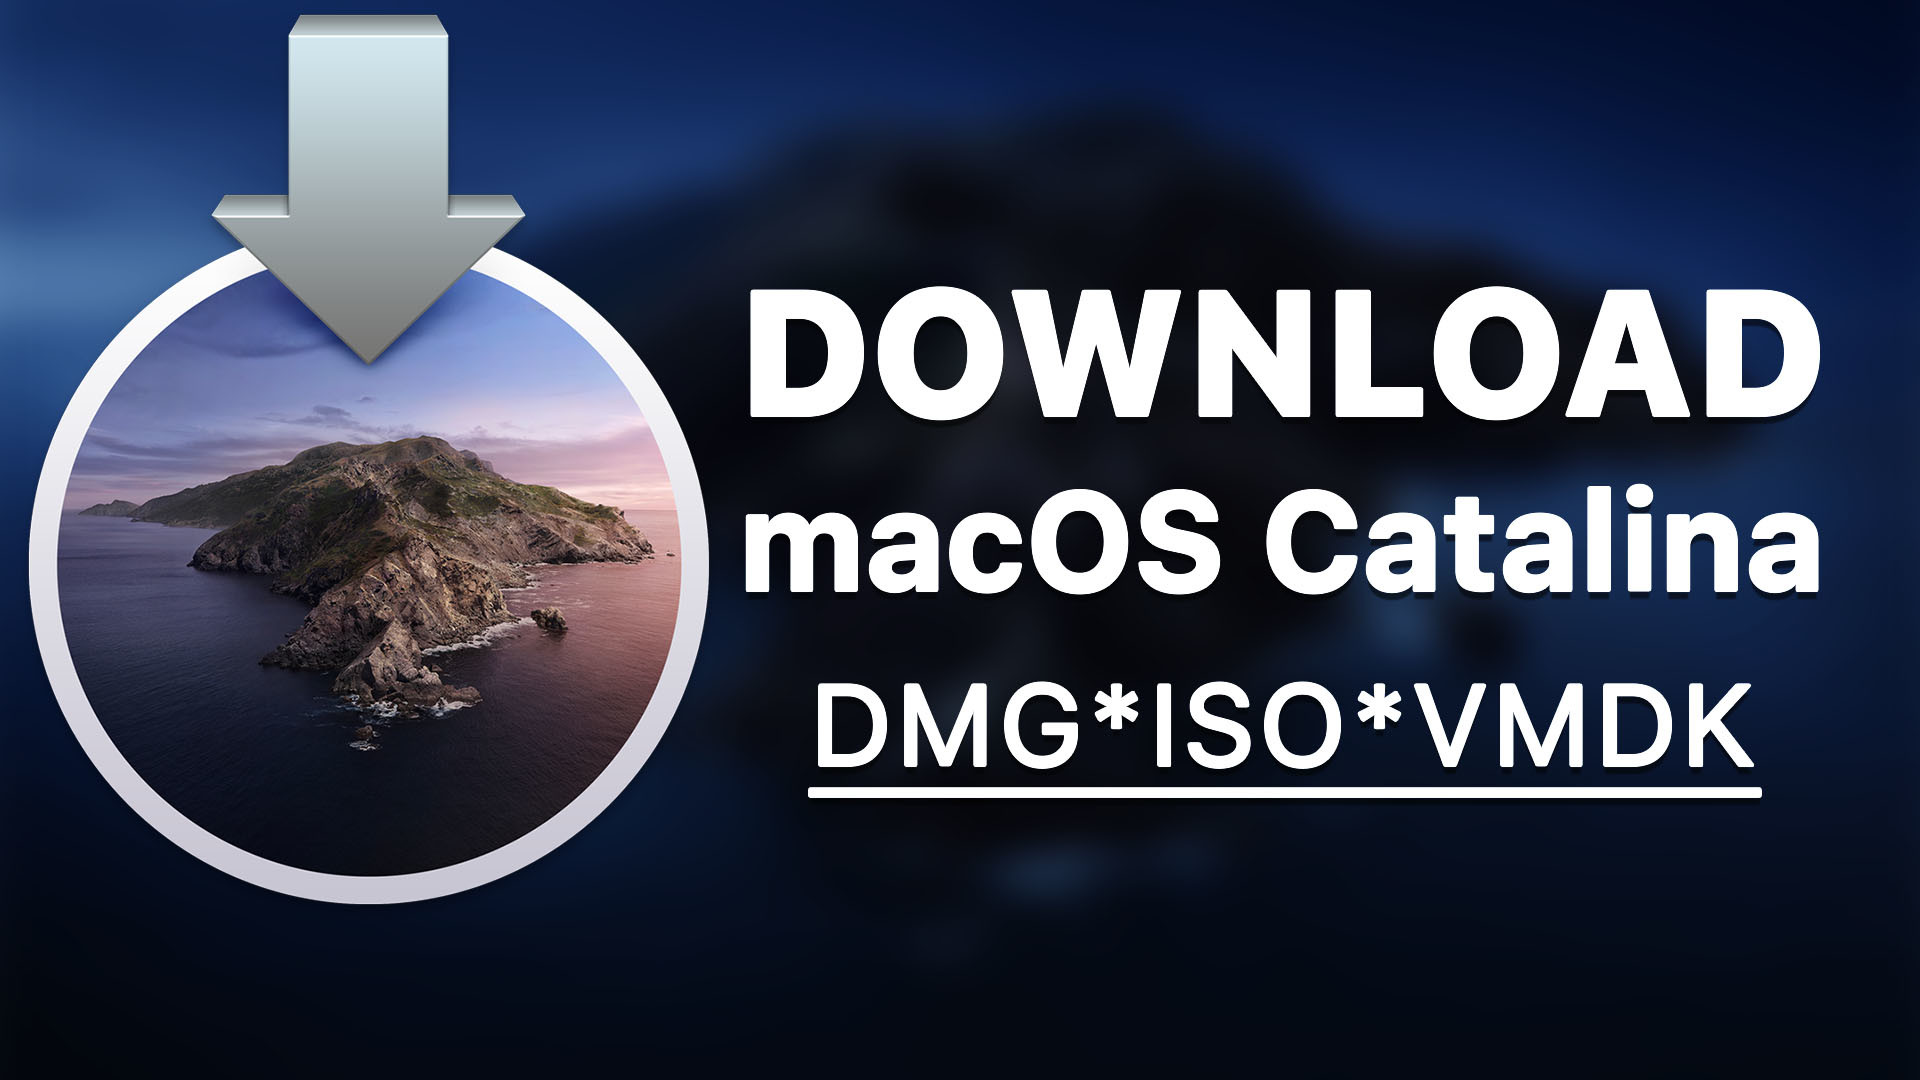 Office For Mac Download Dmg